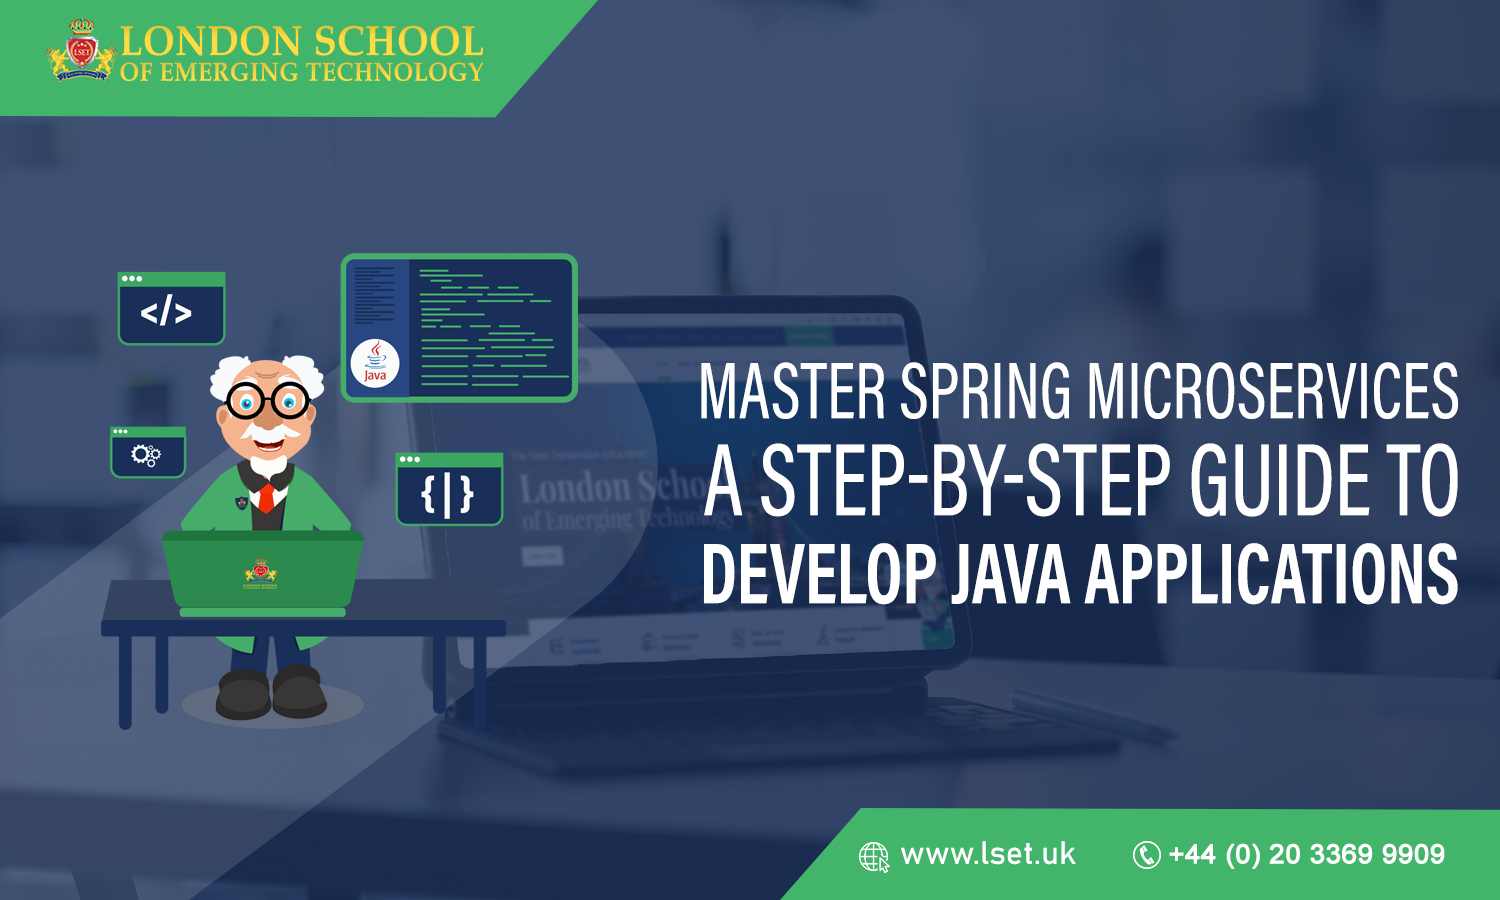 Master Spring Microservices A Step-by-Step Guide to Develop Java Applications